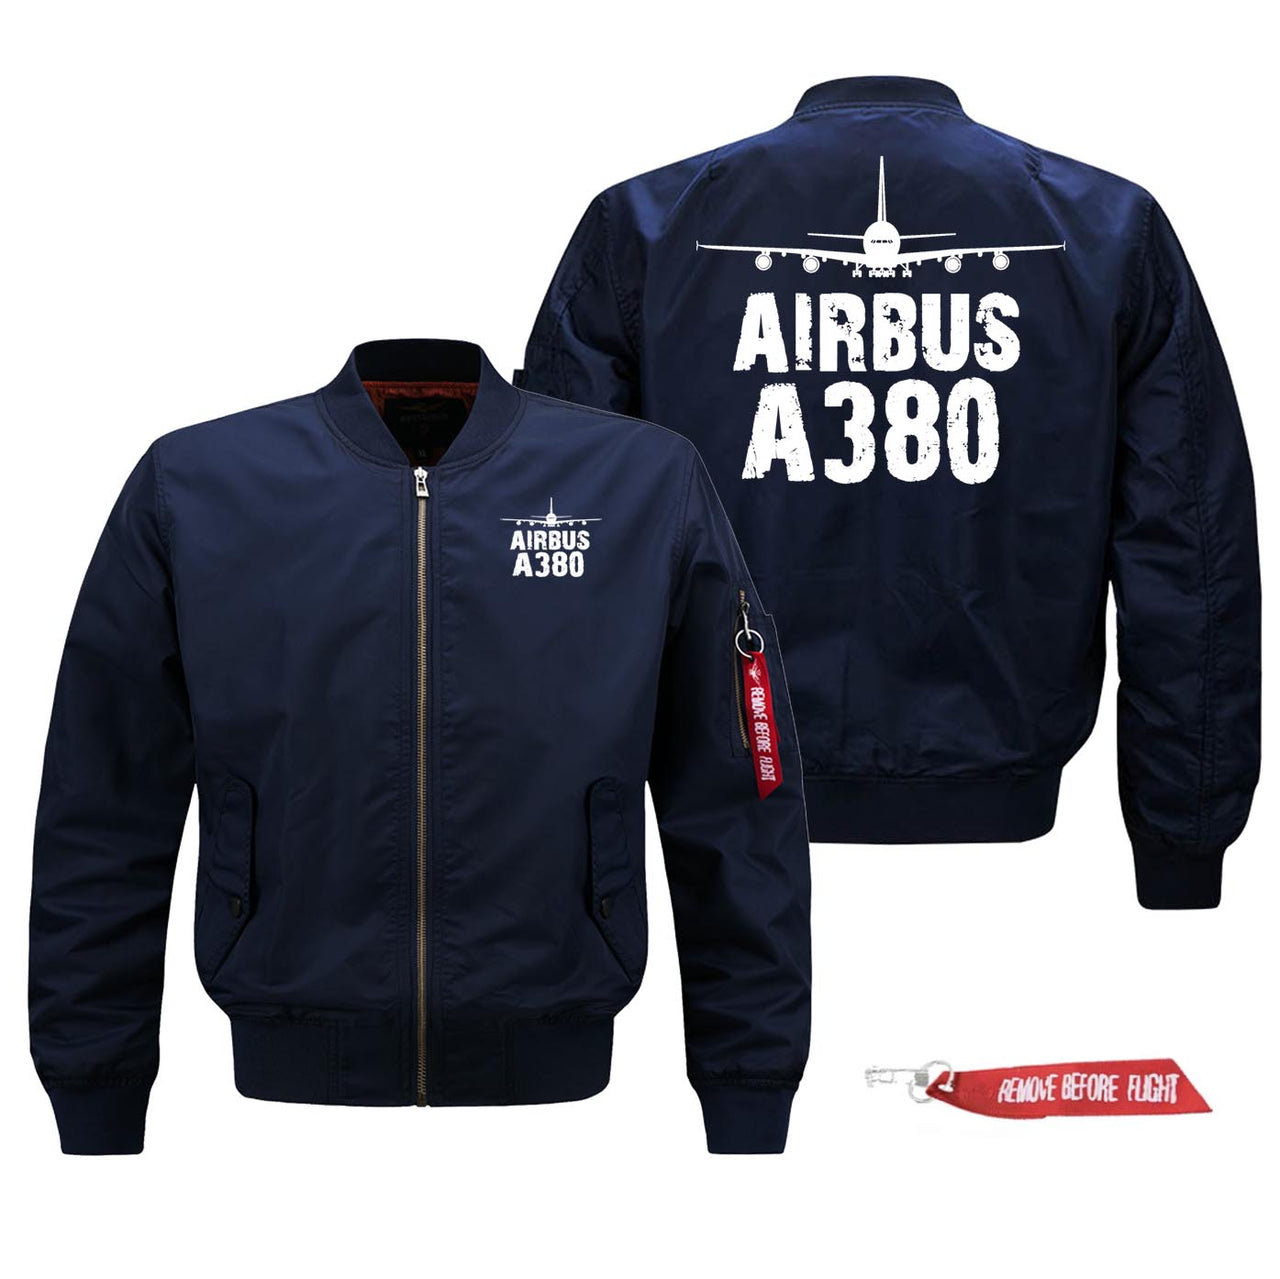 Airbus A380 Silhouette & Designed Pilot Jackets (Customizable)